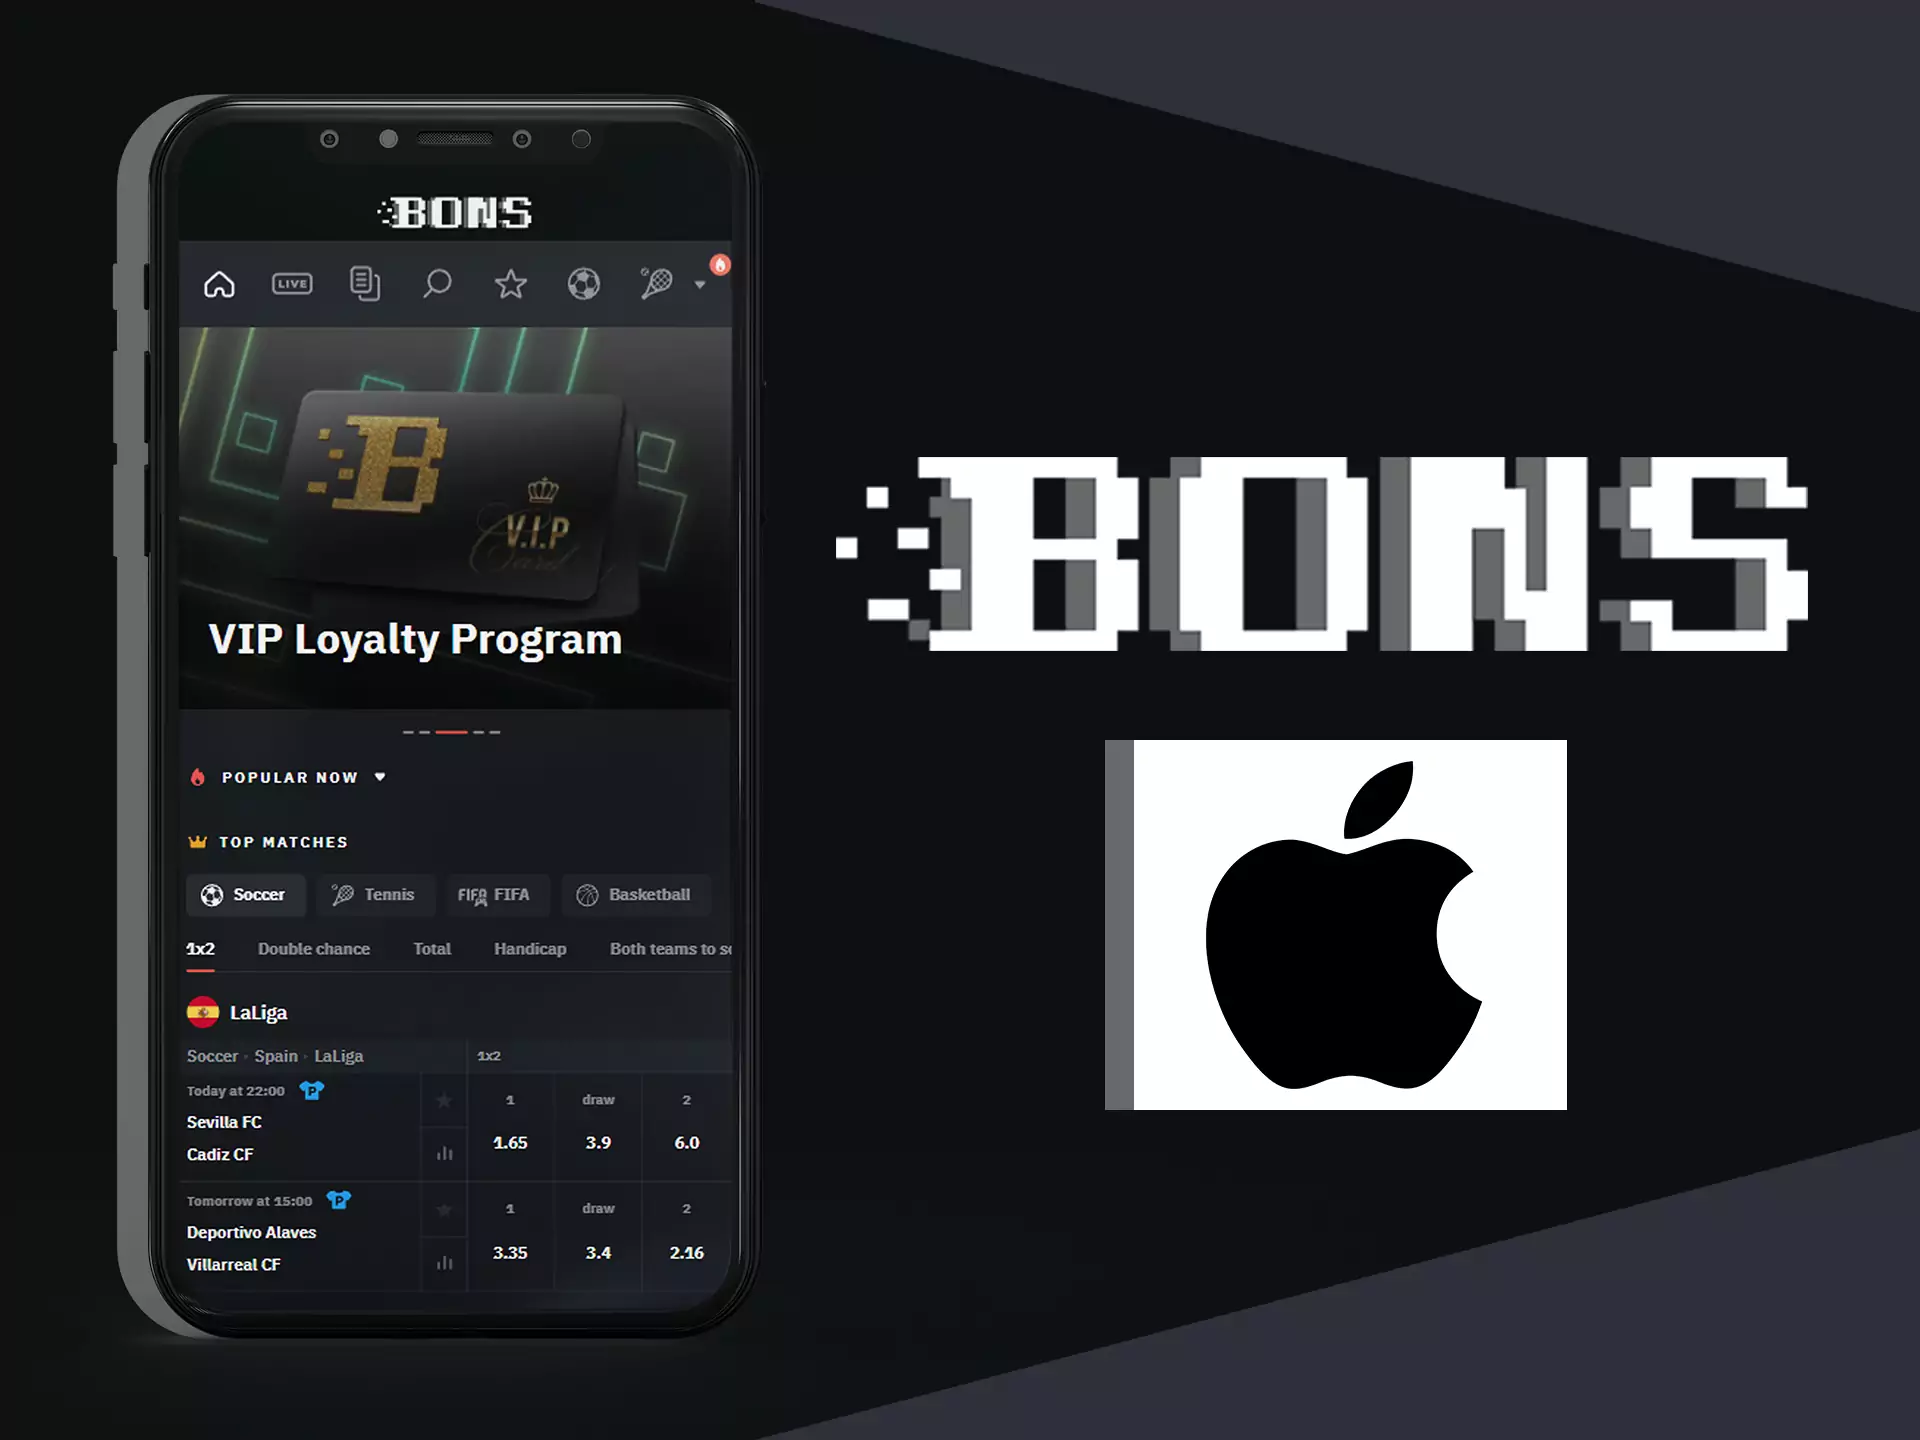 The Bons app for the iOS is in development.